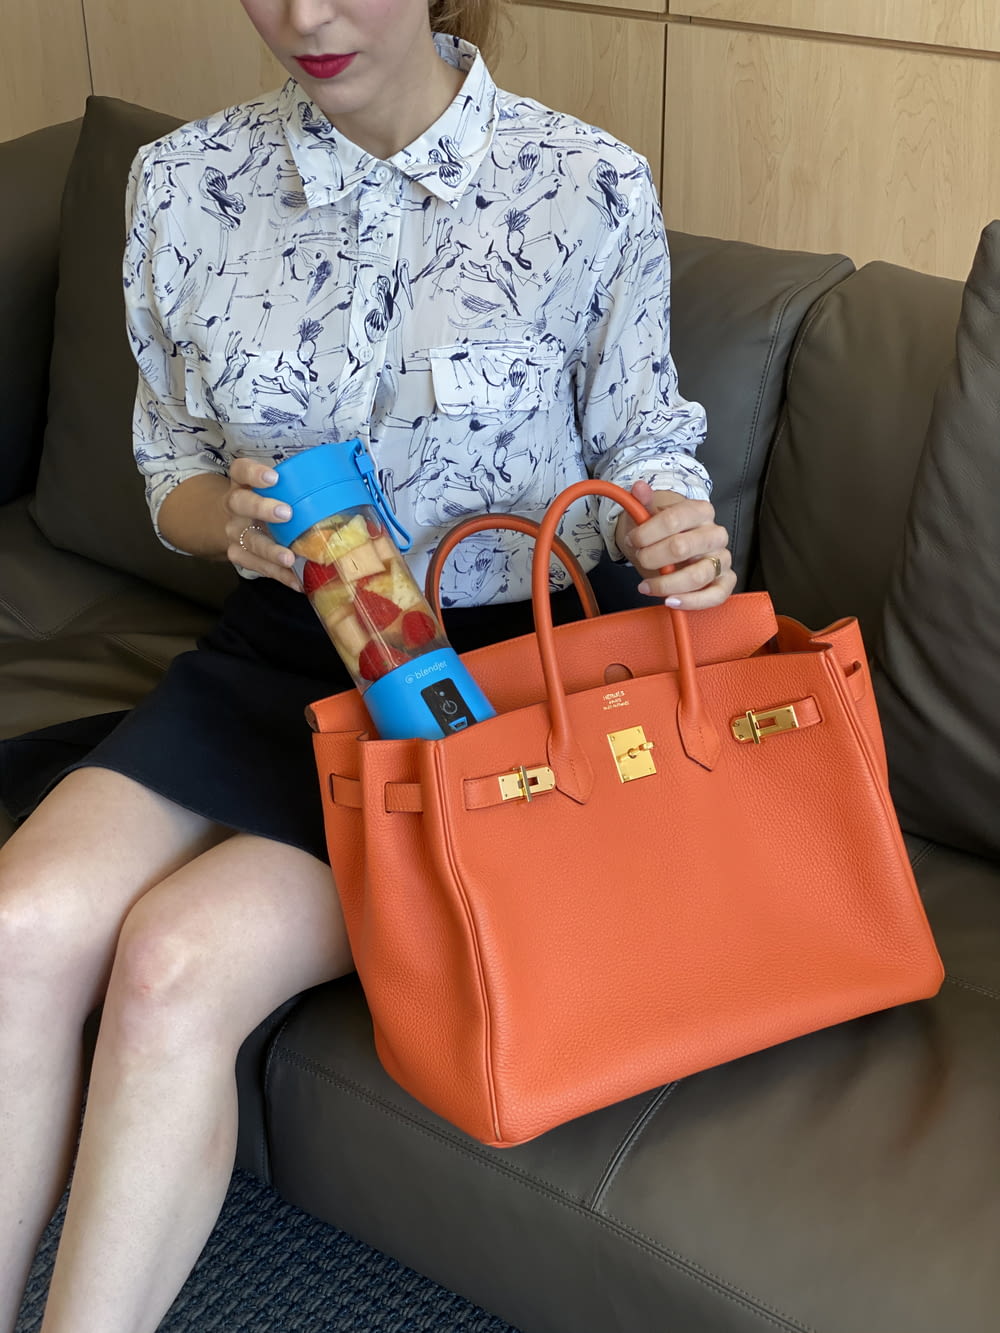 a woman sitting on a couch holding a purse